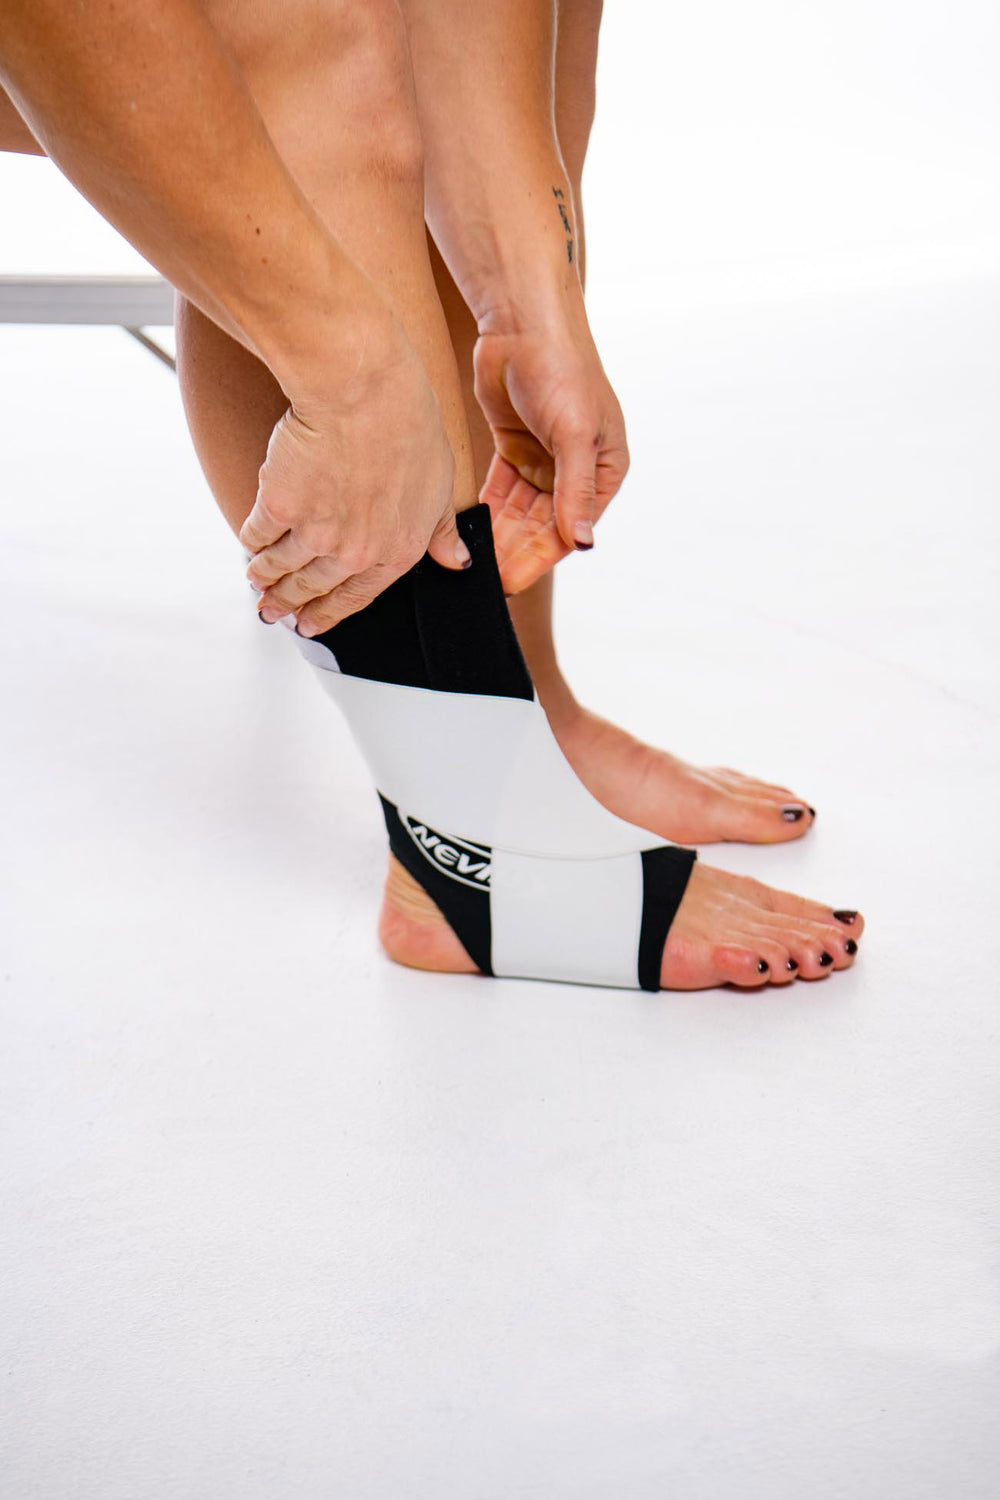 NelMed Ankle Wrap Support  Helps Protect & Prevent Ankle Injuries